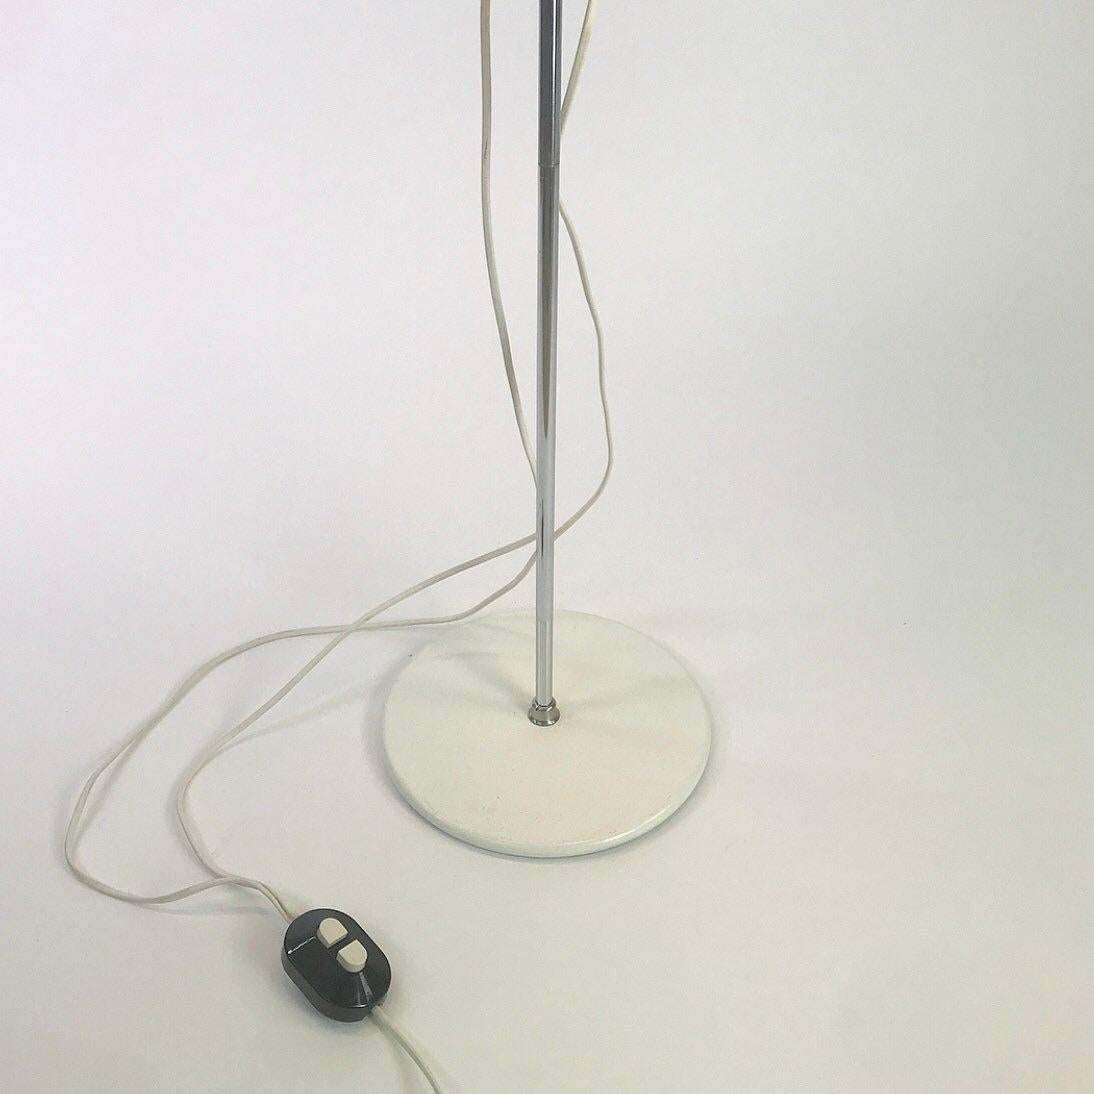 Late 20th Century Classic Danish Floor Lamp from the 1970s by Hans Due for Fog & Mørup